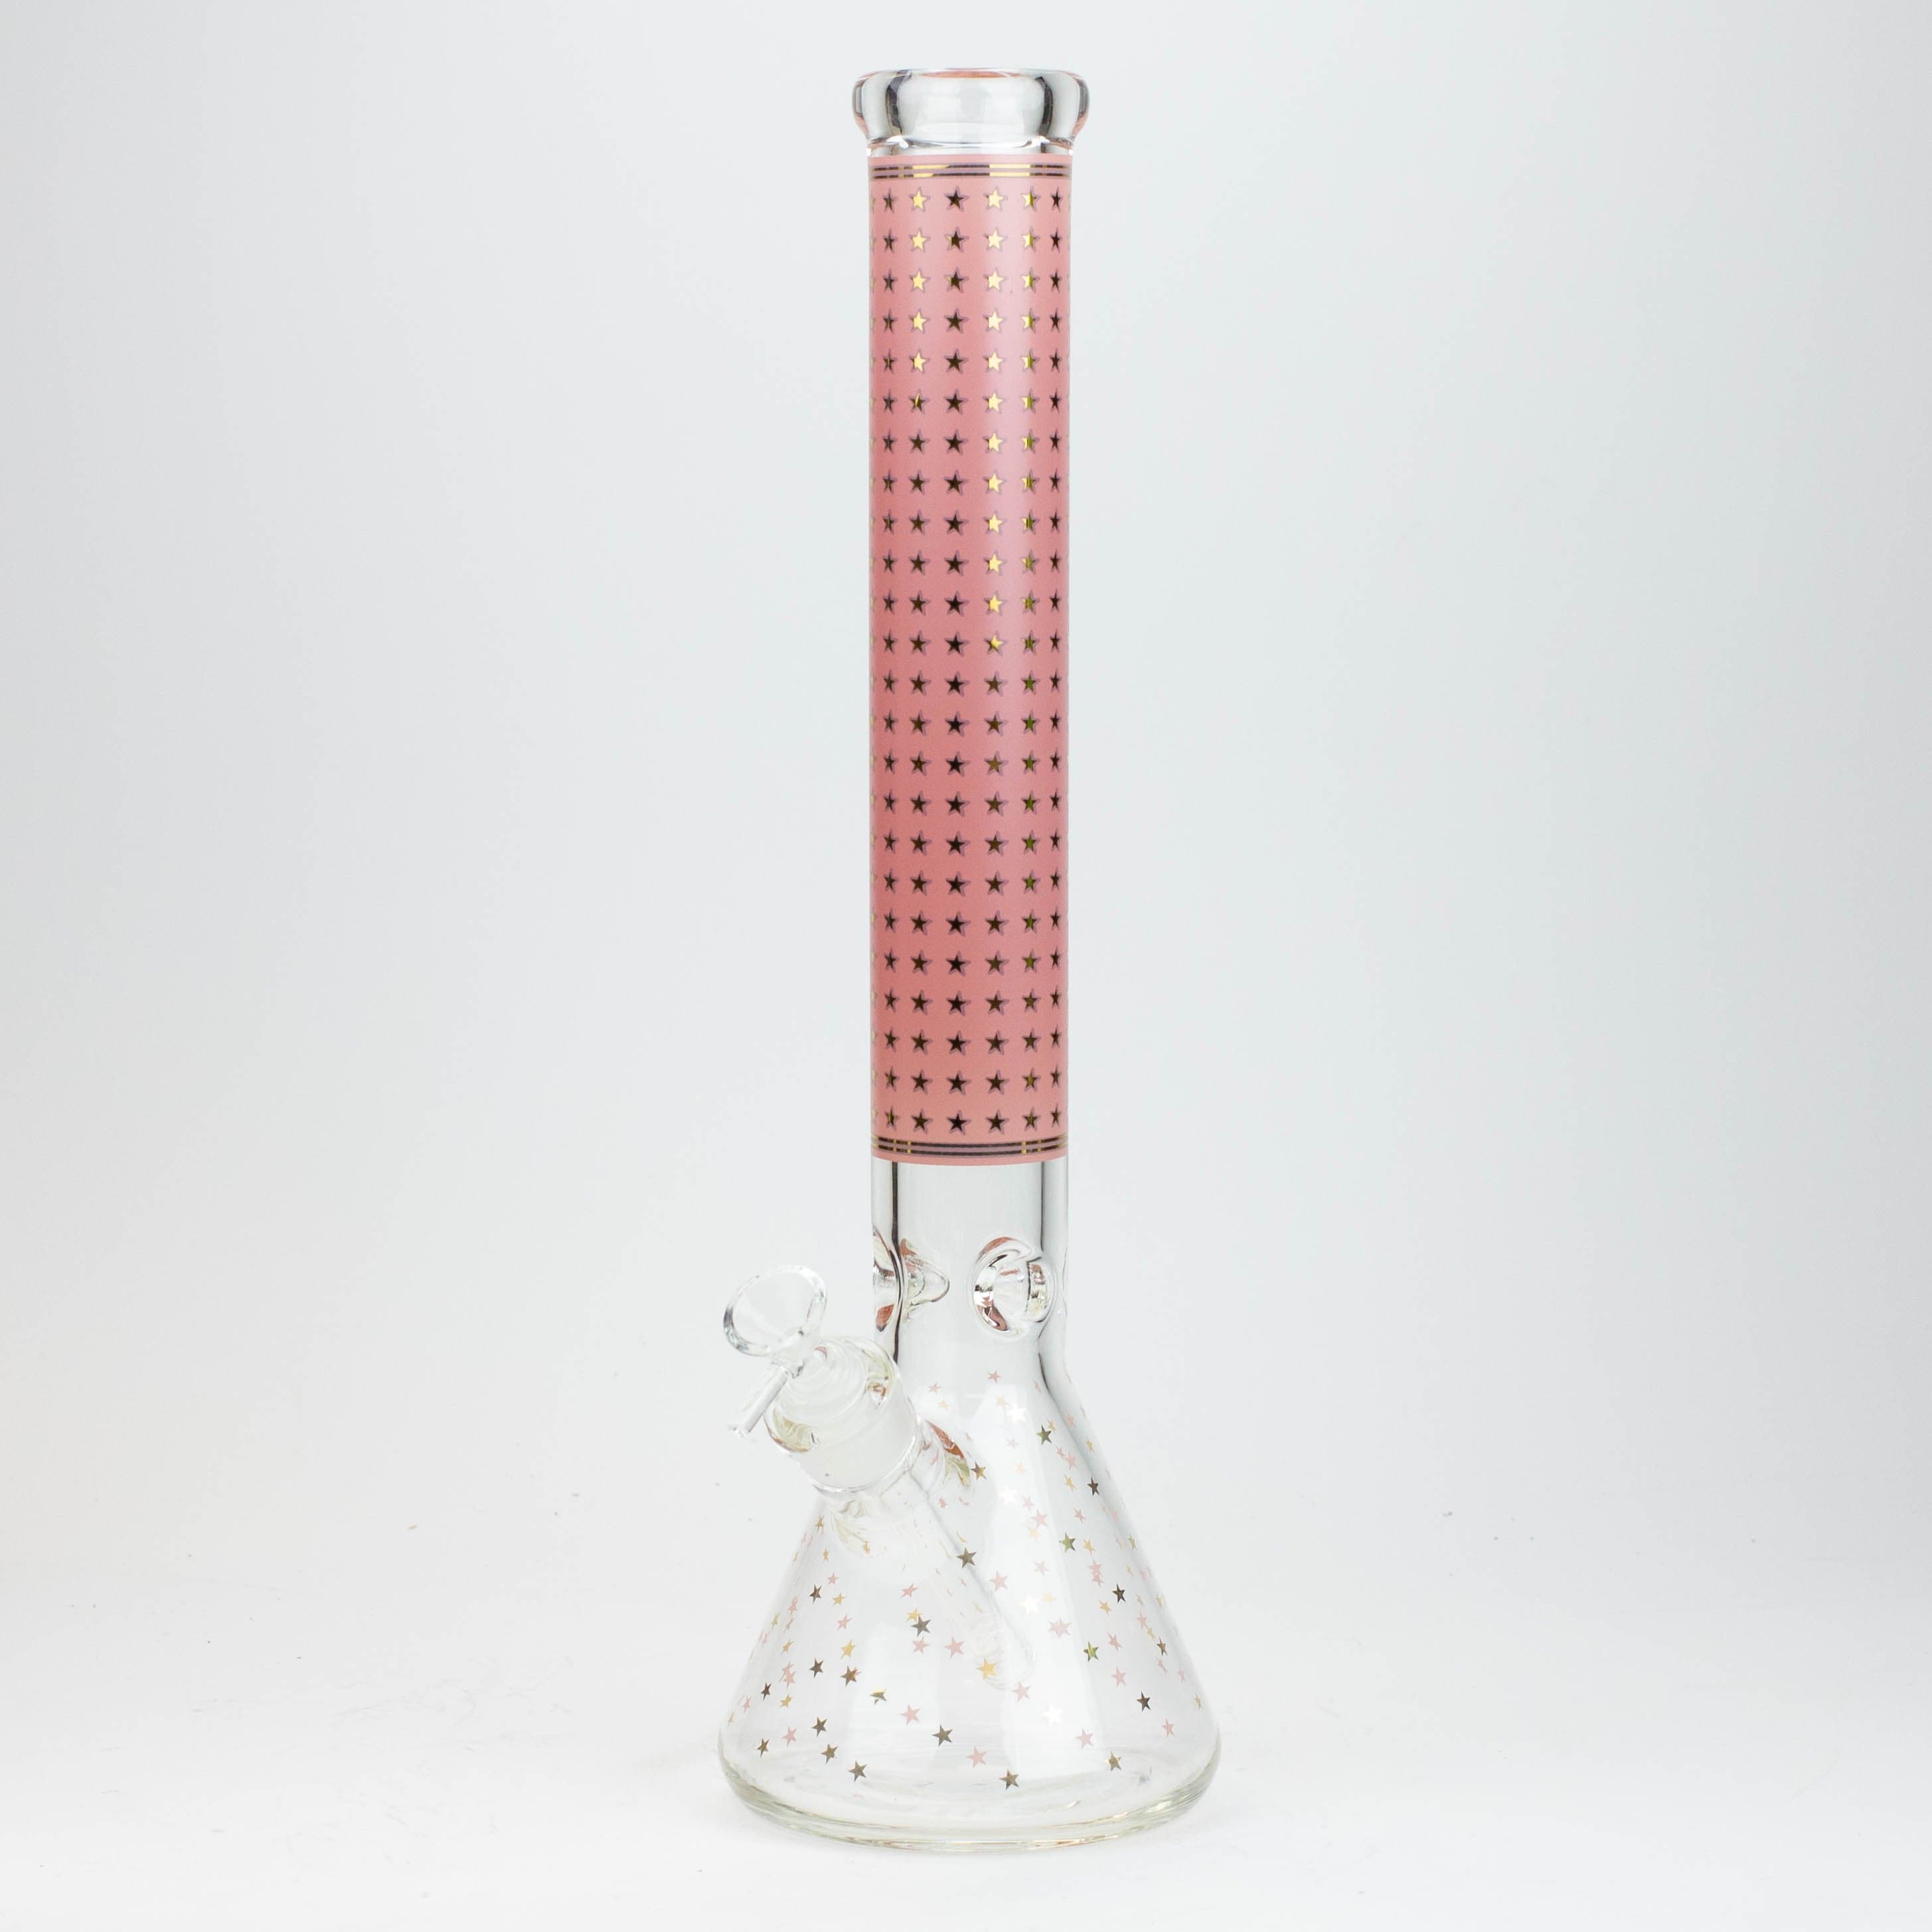 Star 7 mm glass water pipes 17.5"_1